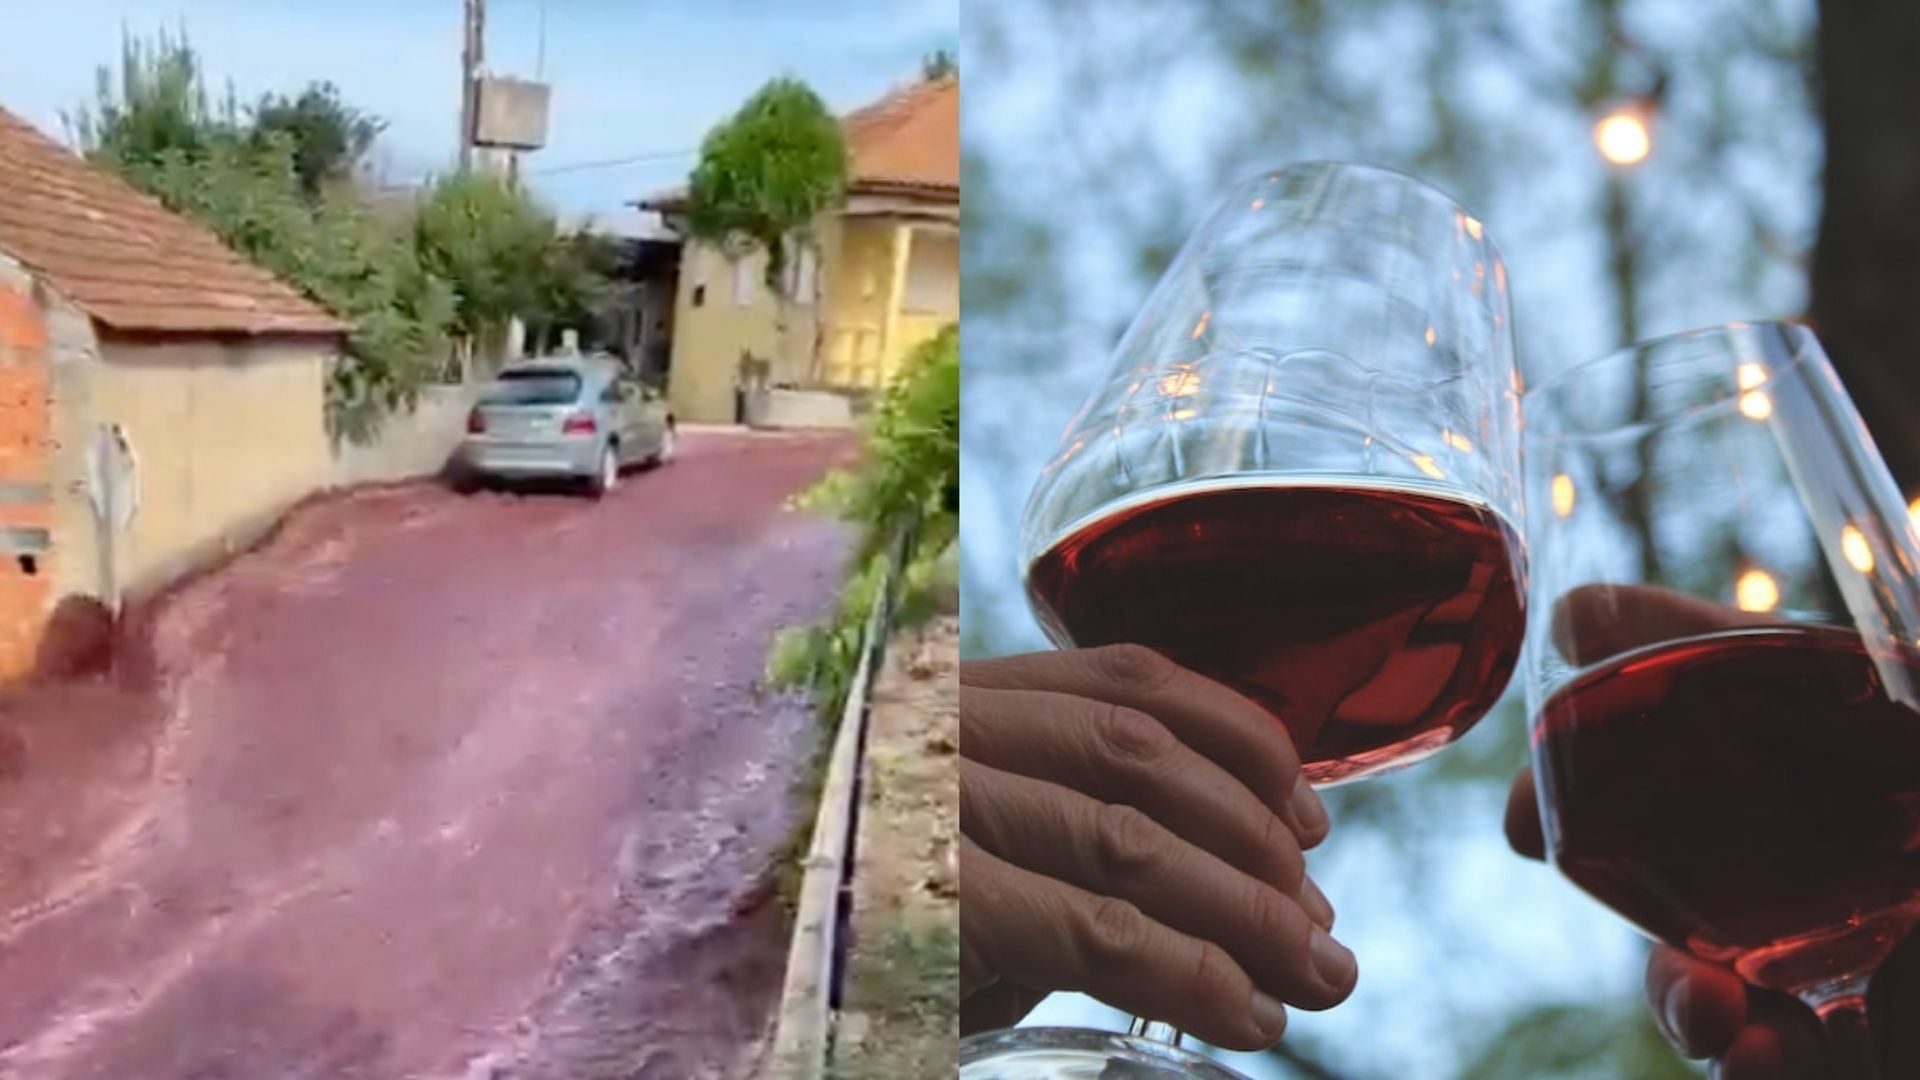 Red wine spilled in a Portuguese town and flooded it. (Image via YouTube)